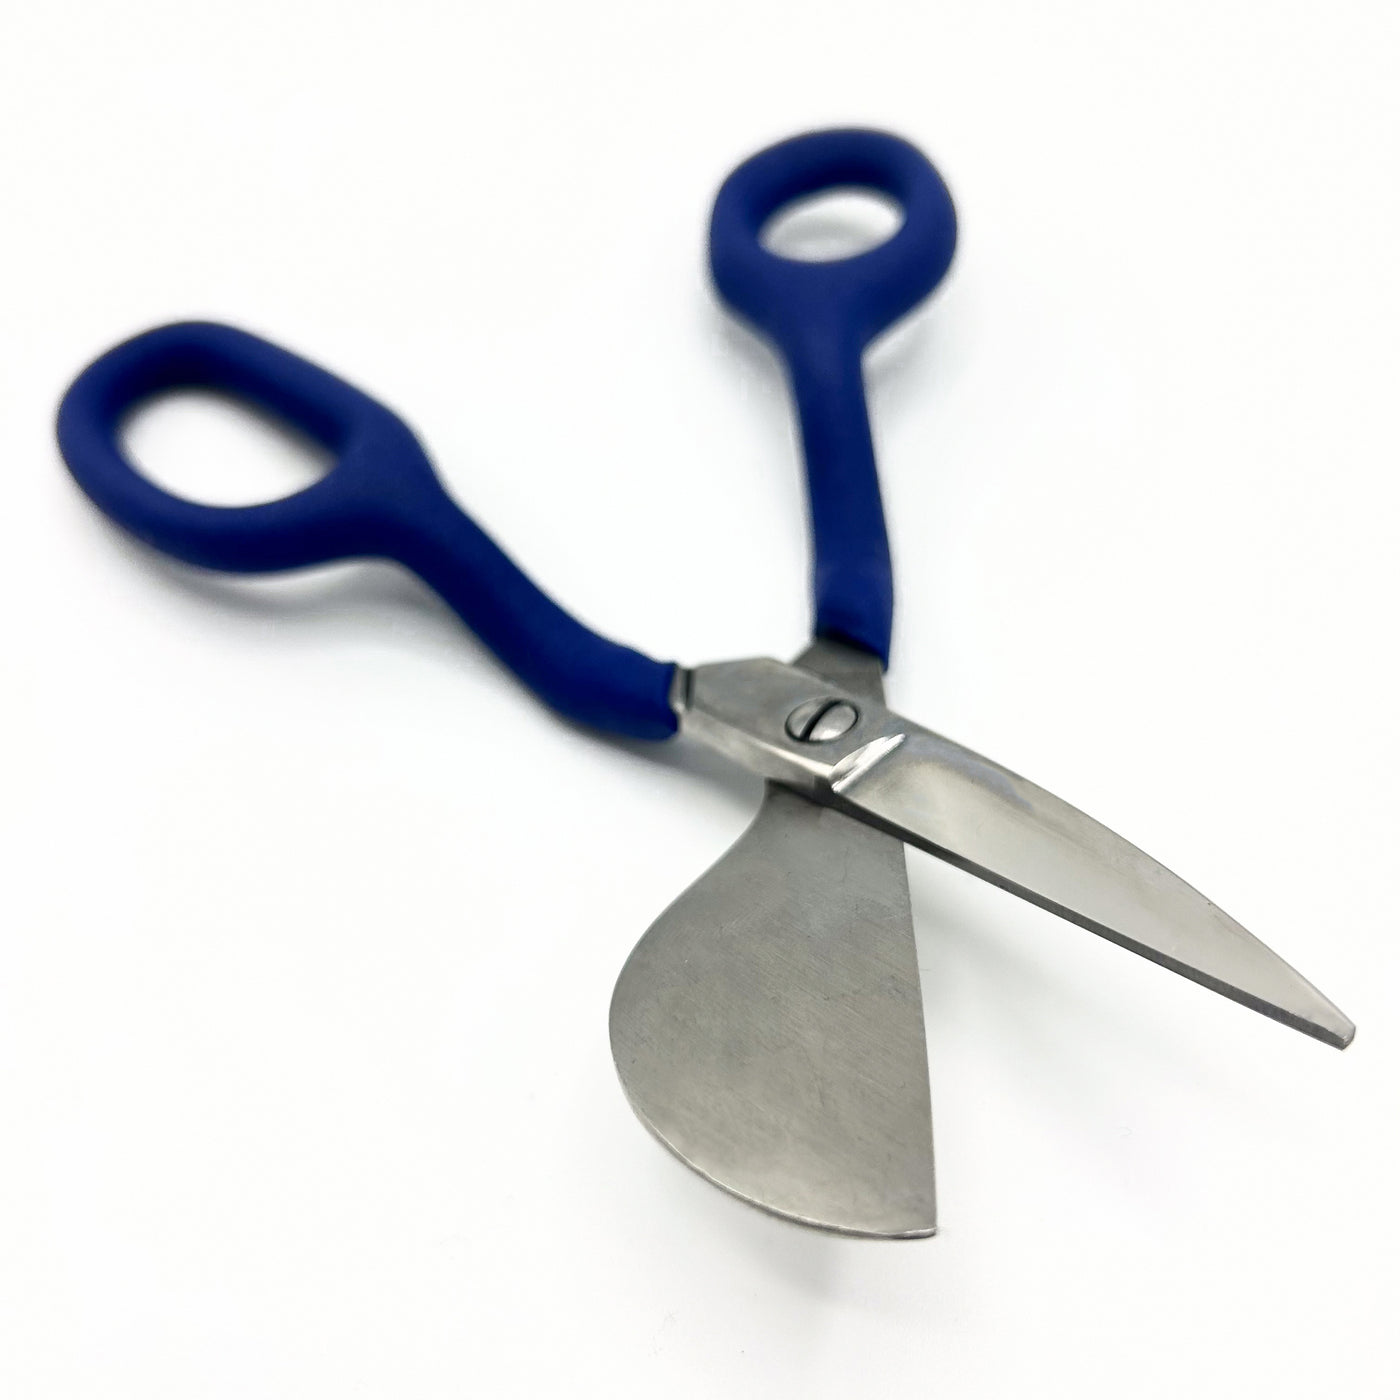 Essential rug-making shears featuring a wide duckbill blade for precise pile trimming and comfortable, moulded grip handle